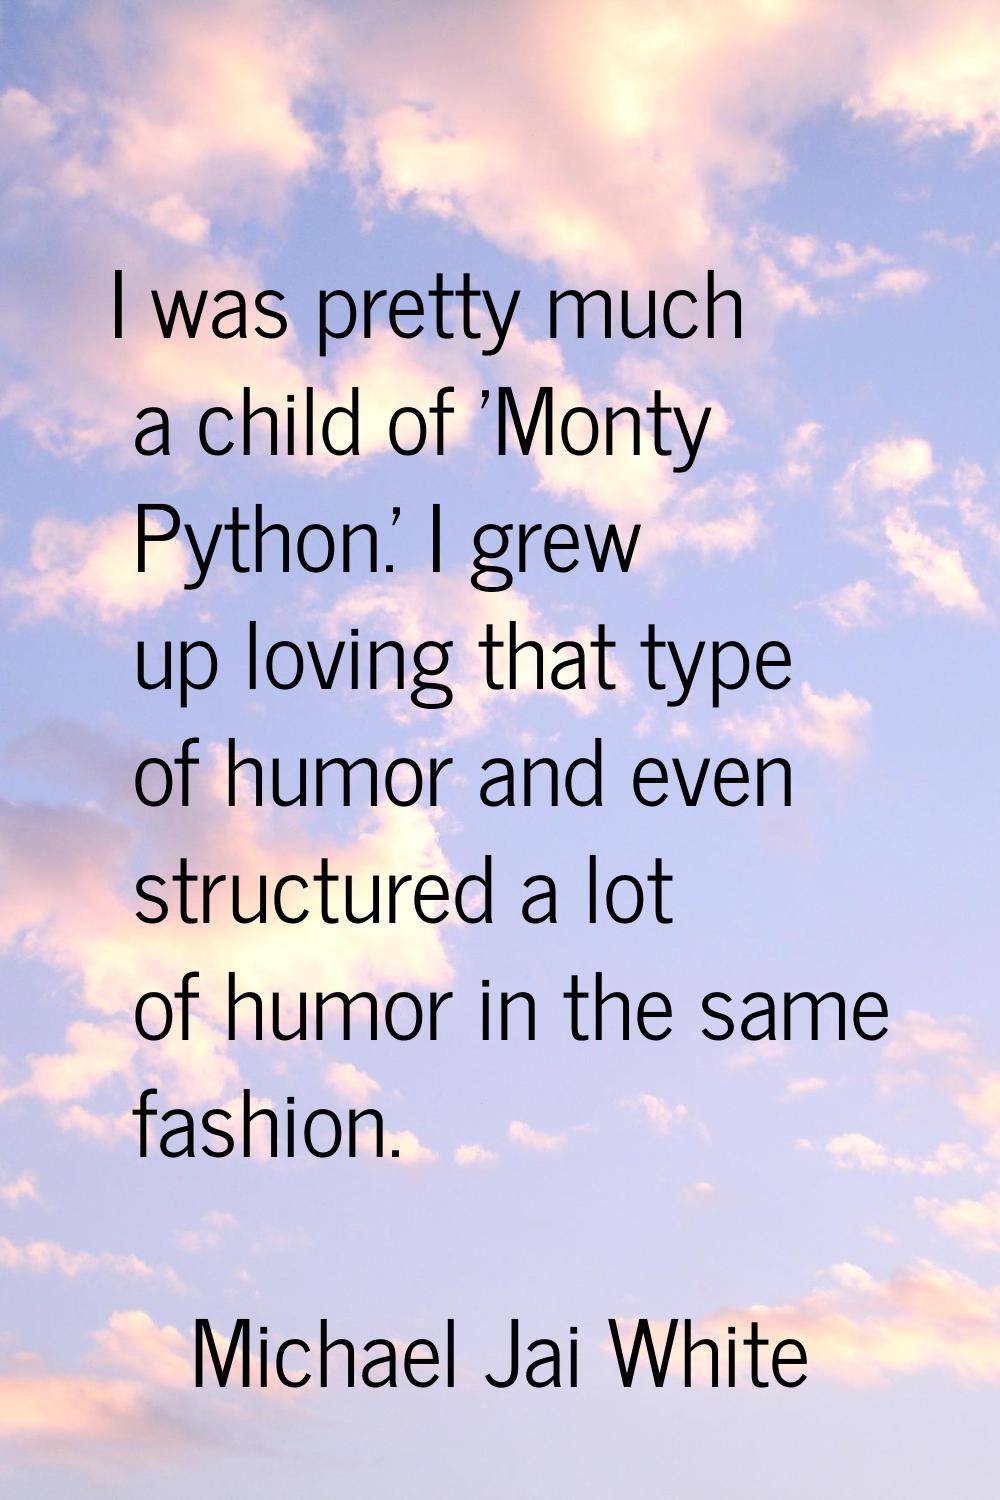 I was pretty much a child of 'Monty Python.' I grew up loving that type of humor and even structure